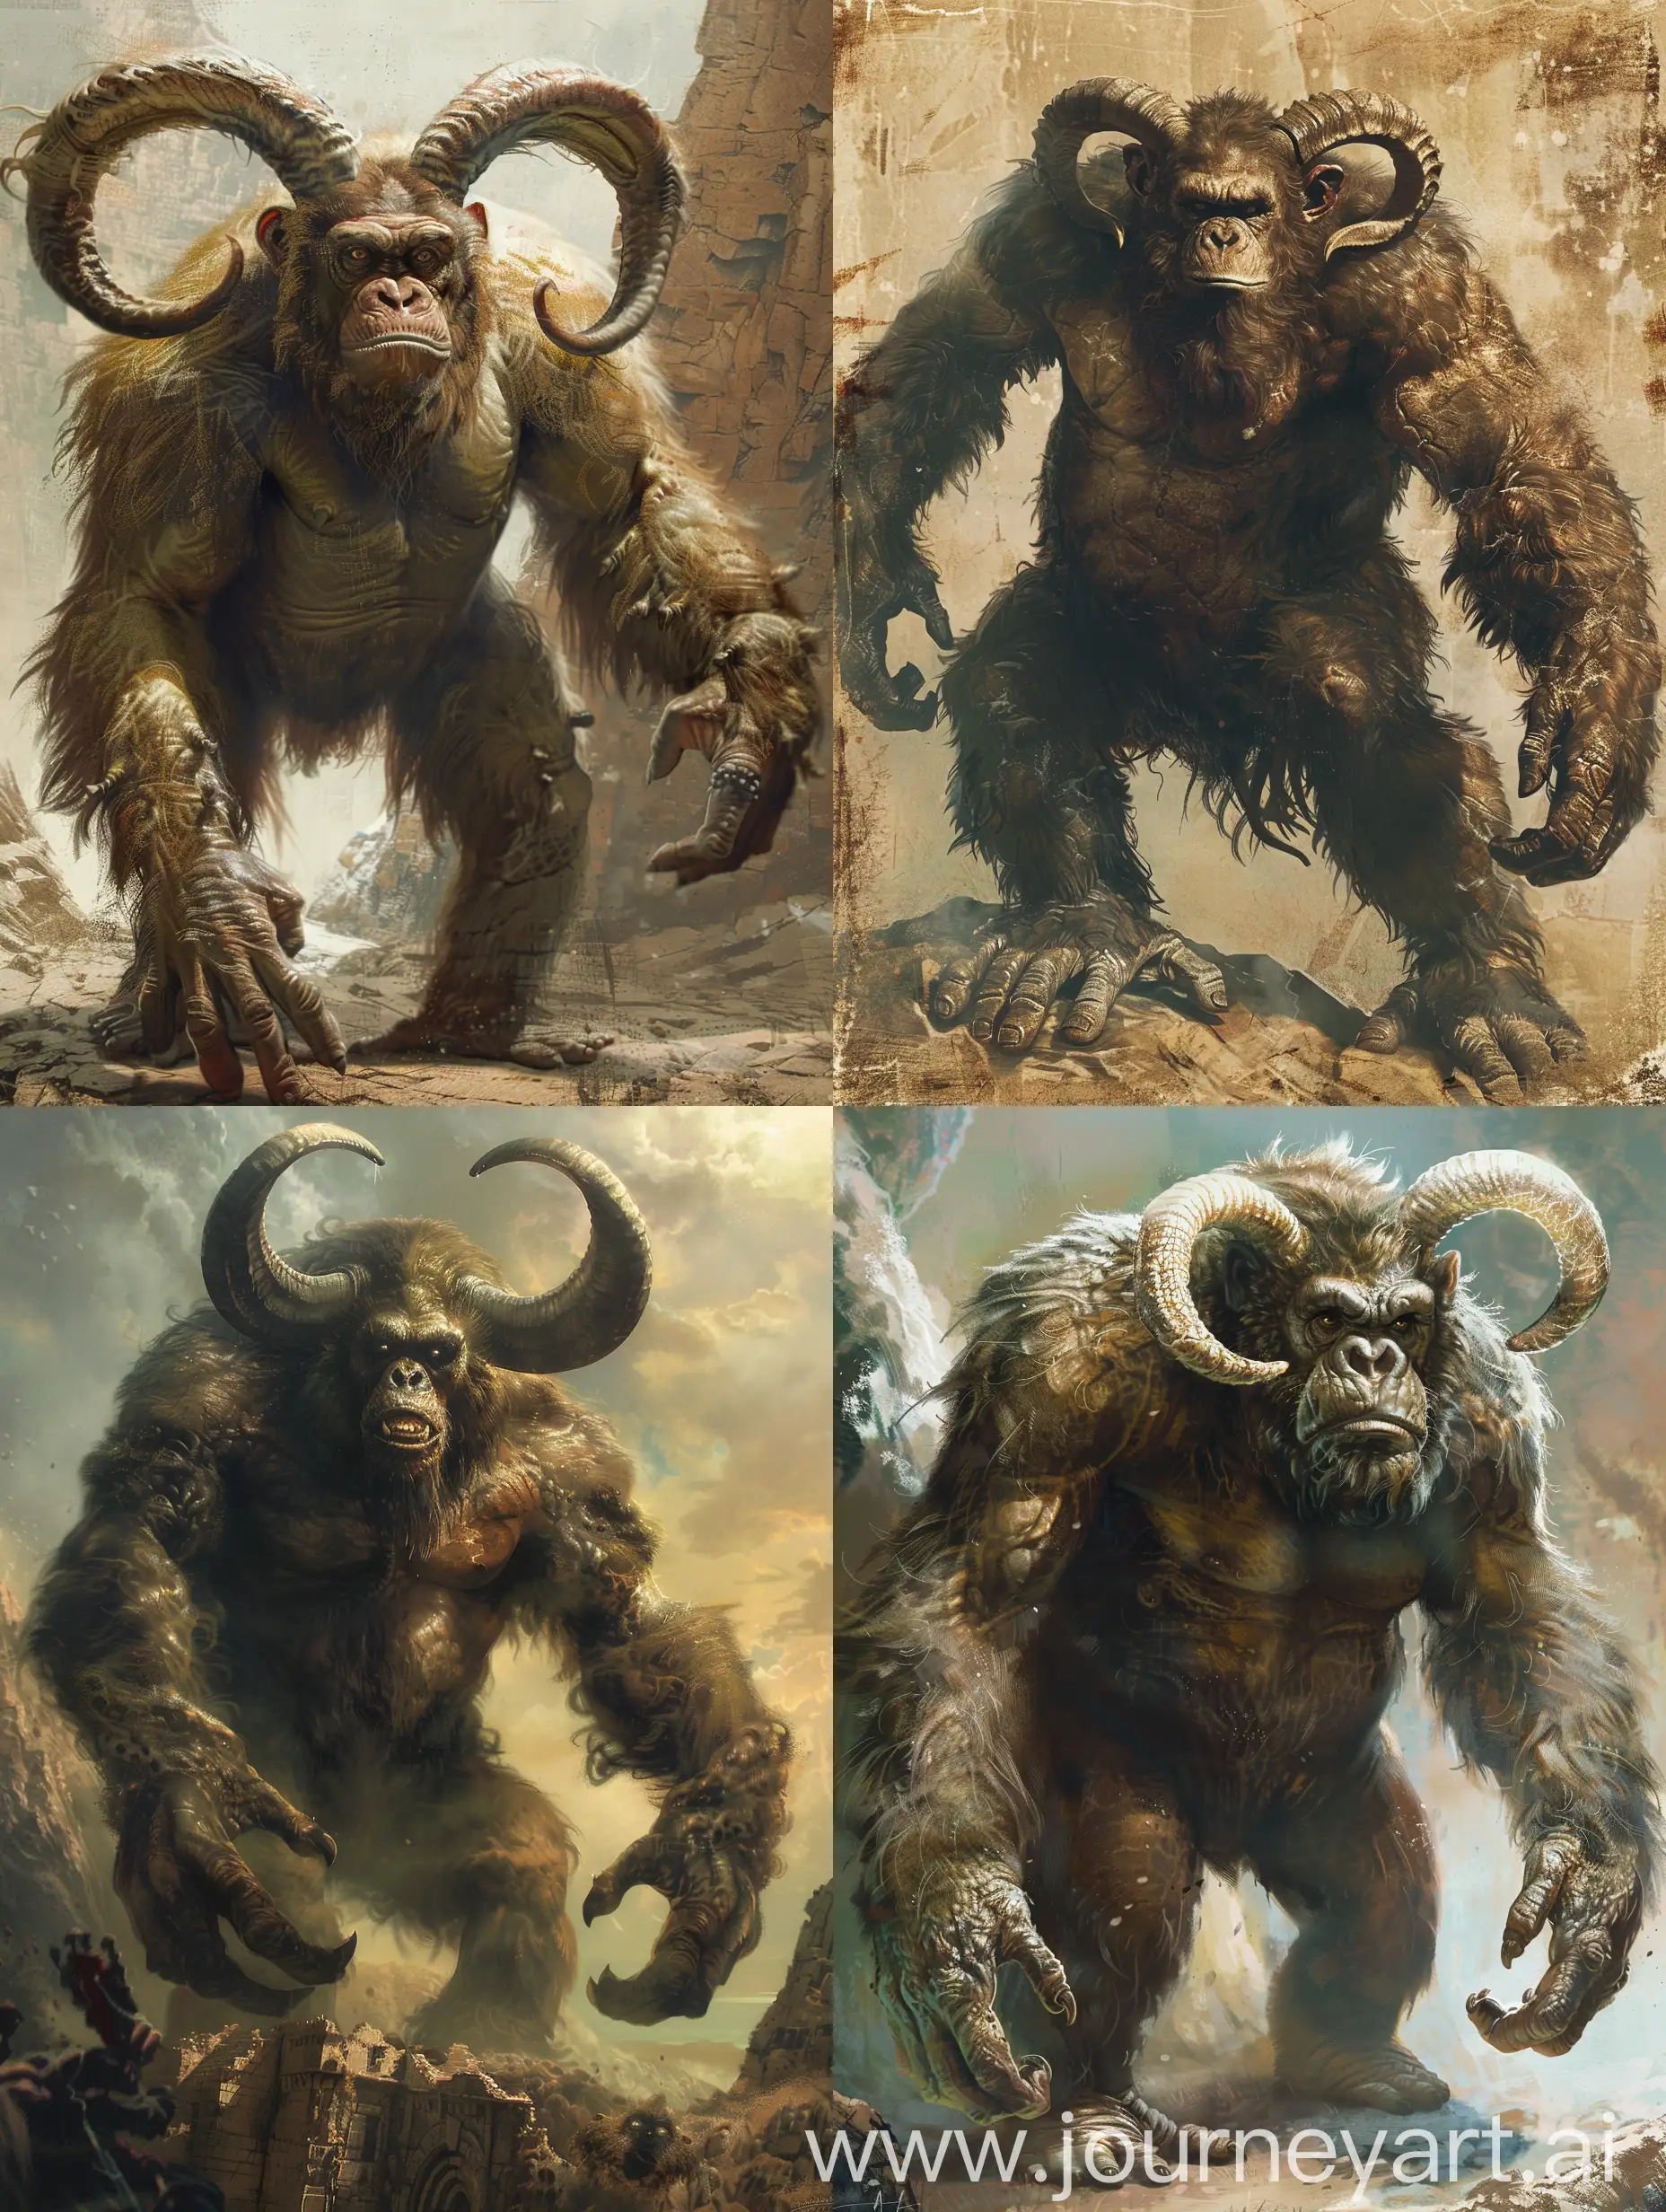 Enormous-Horned-Ape-with-Four-Arms